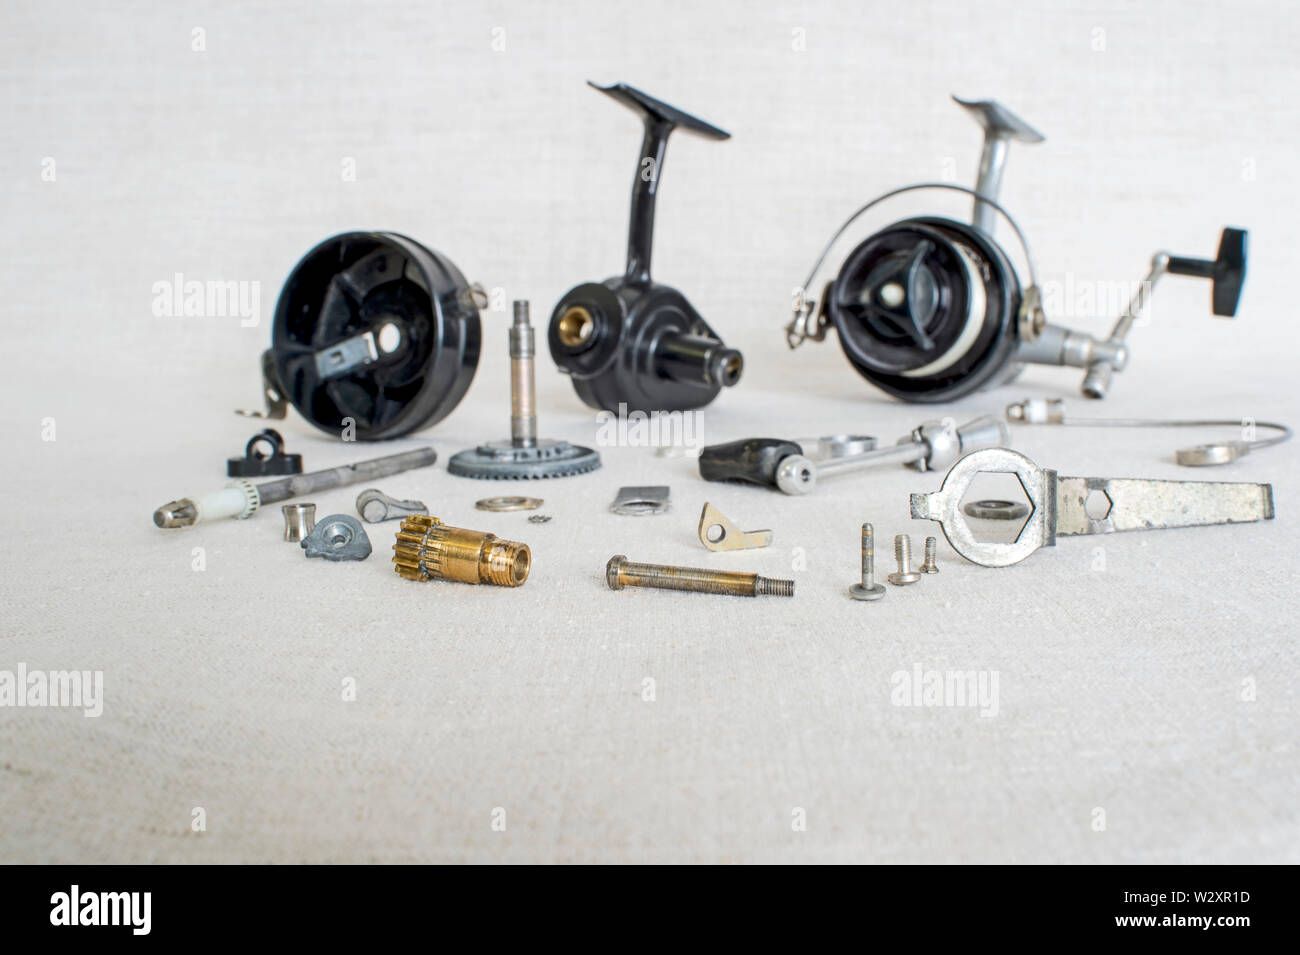 https://c8.alamy.com/comp/W2XR1D/a-fishing-spinning-reel-as-a-whole-and-a-second-similar-completely-disassembled-concept-parts-of-a-whole-W2XR1D.jpg